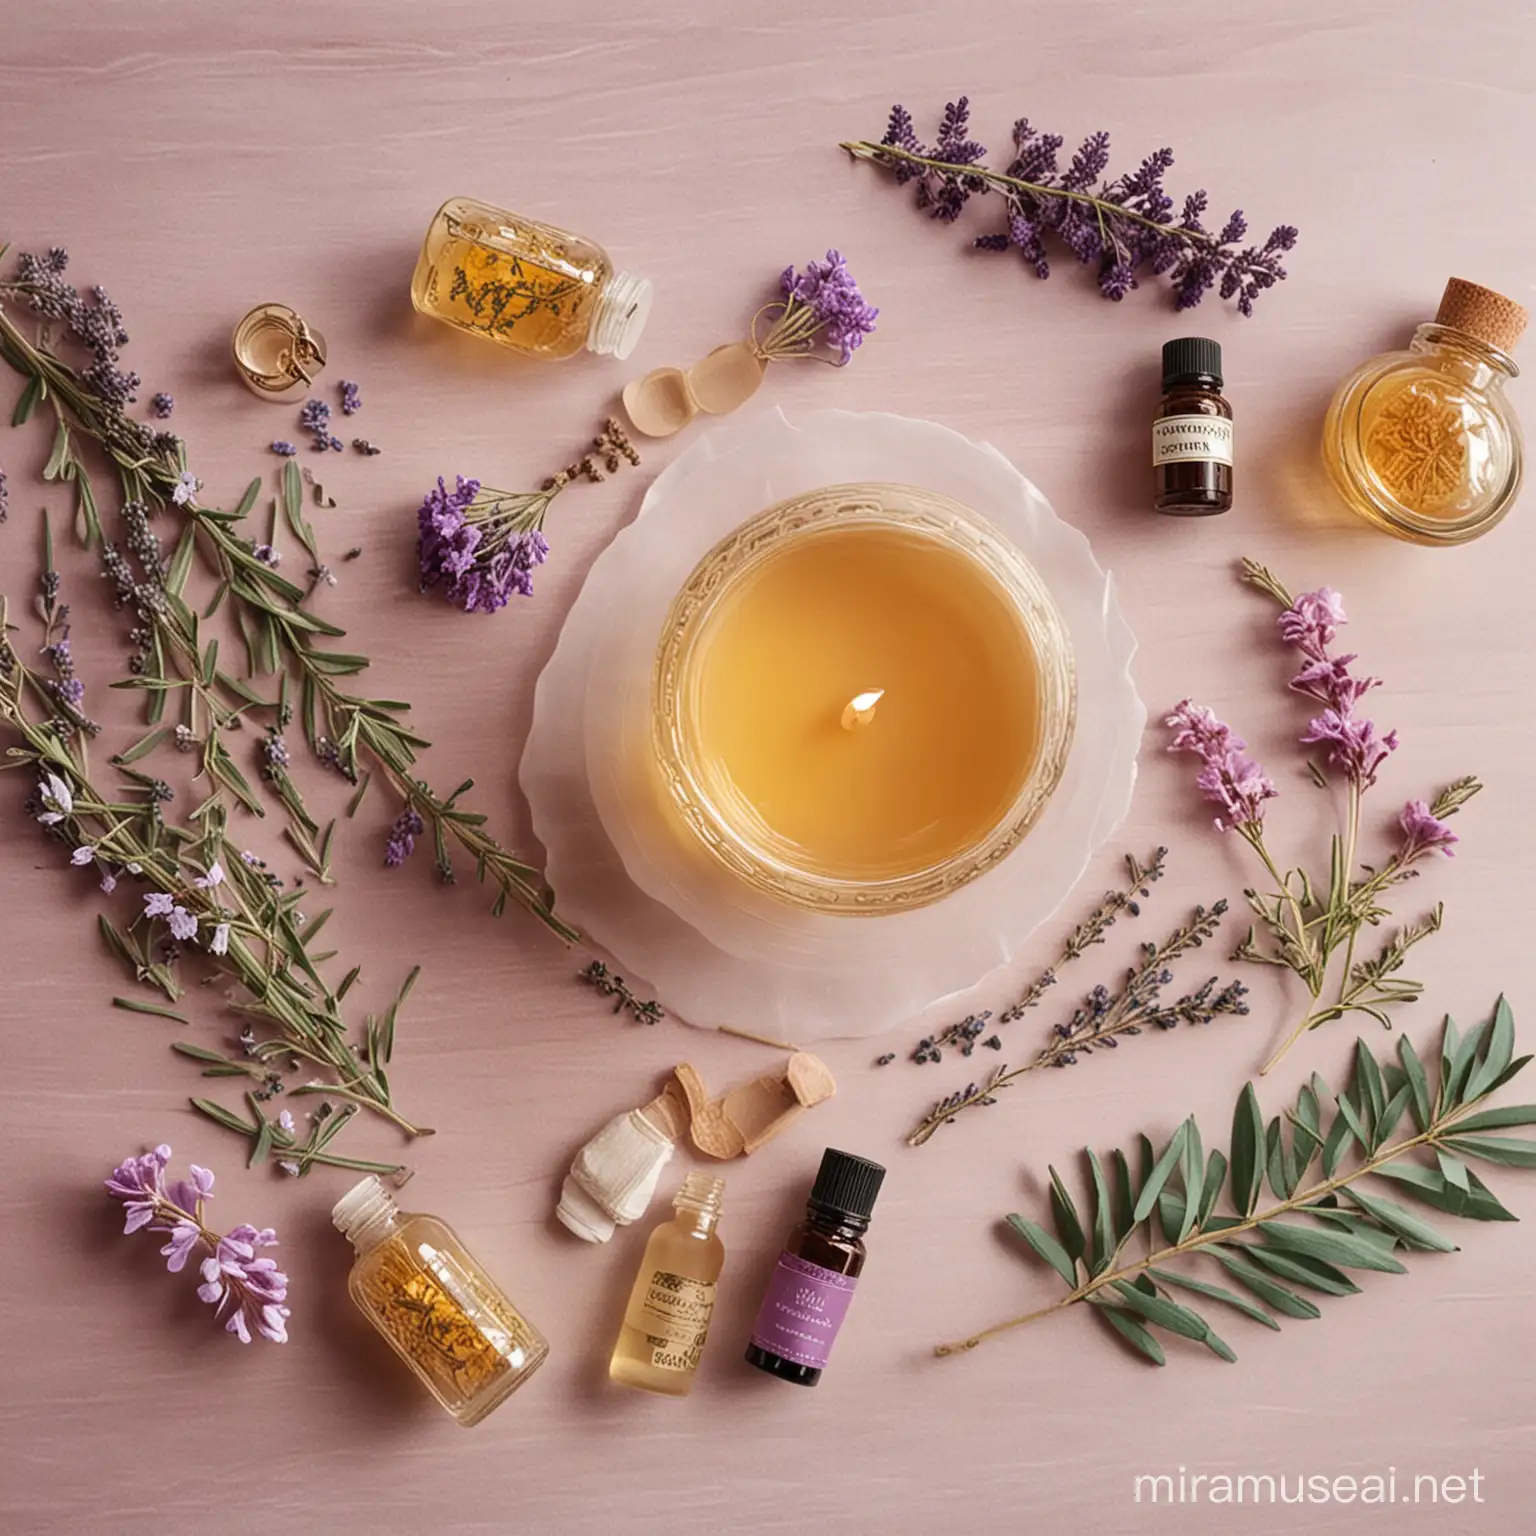 Relaxing Aromatherapy Session with Essential Oils